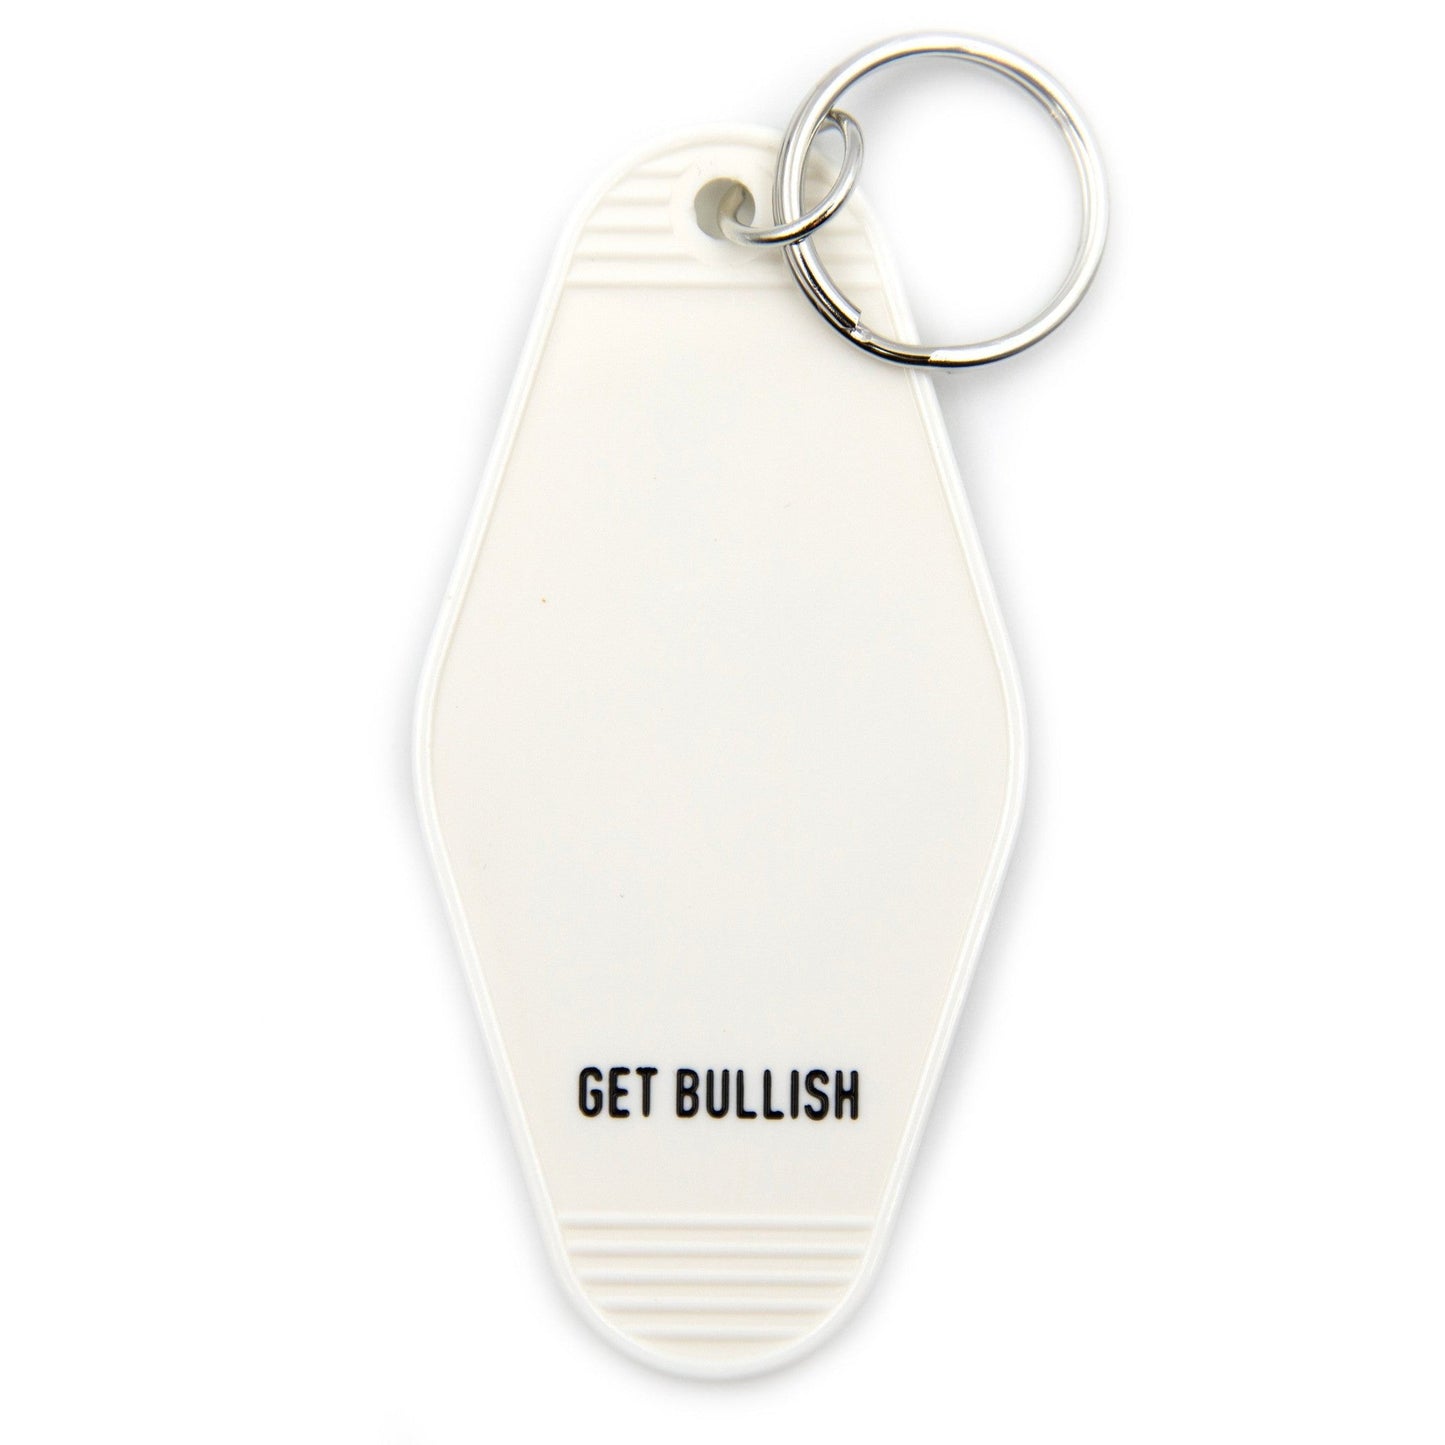 Out of Patience for Deeply Disappointing Men Motel Style Keychain in White